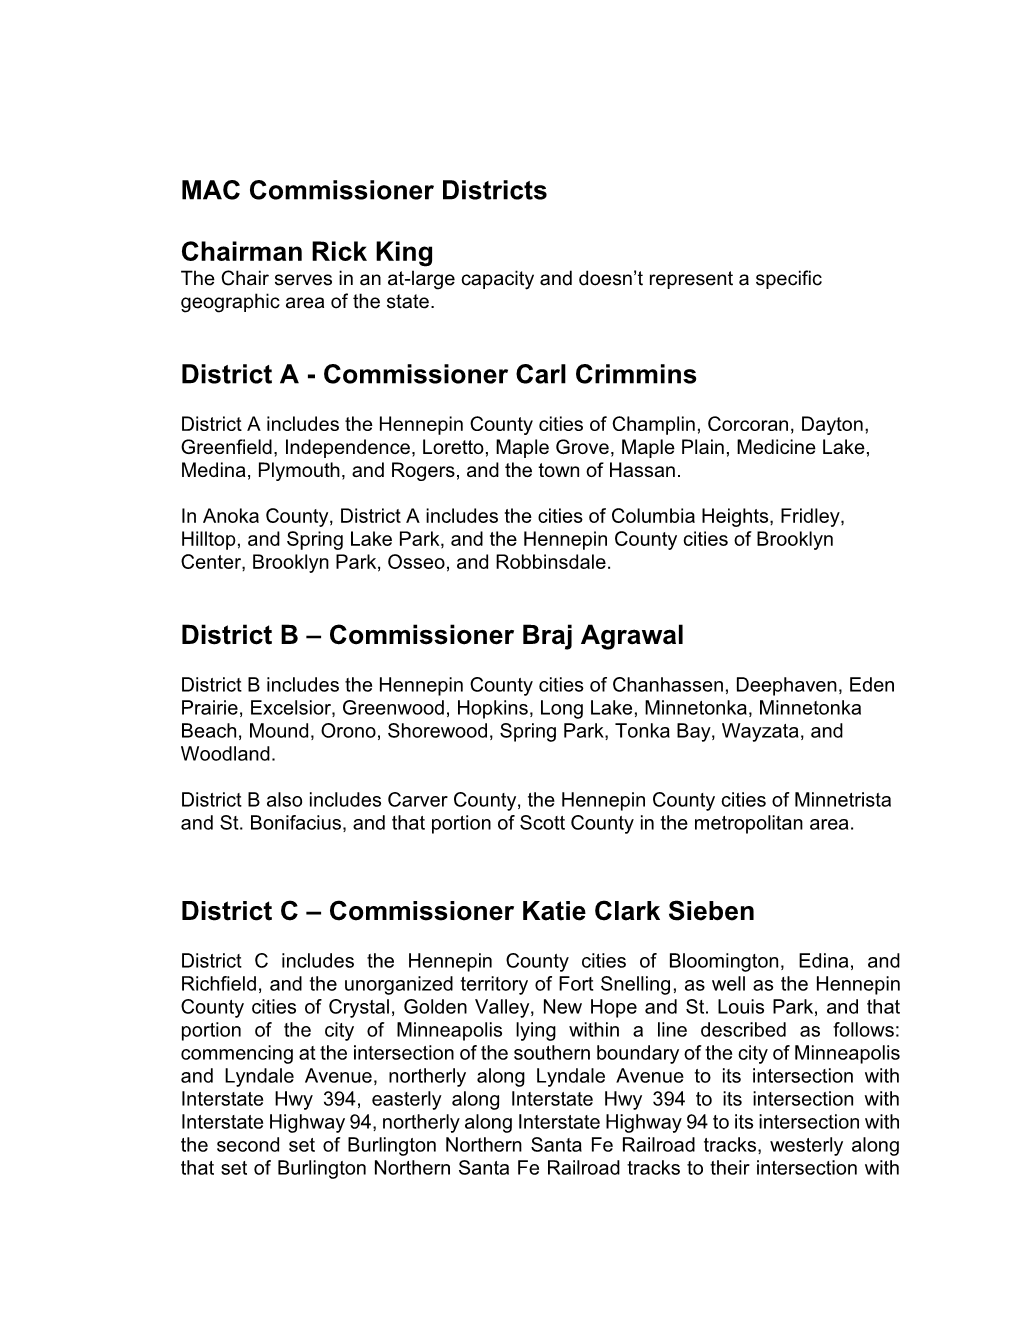 MAC Commissioner Districts Chairman Rick King District A